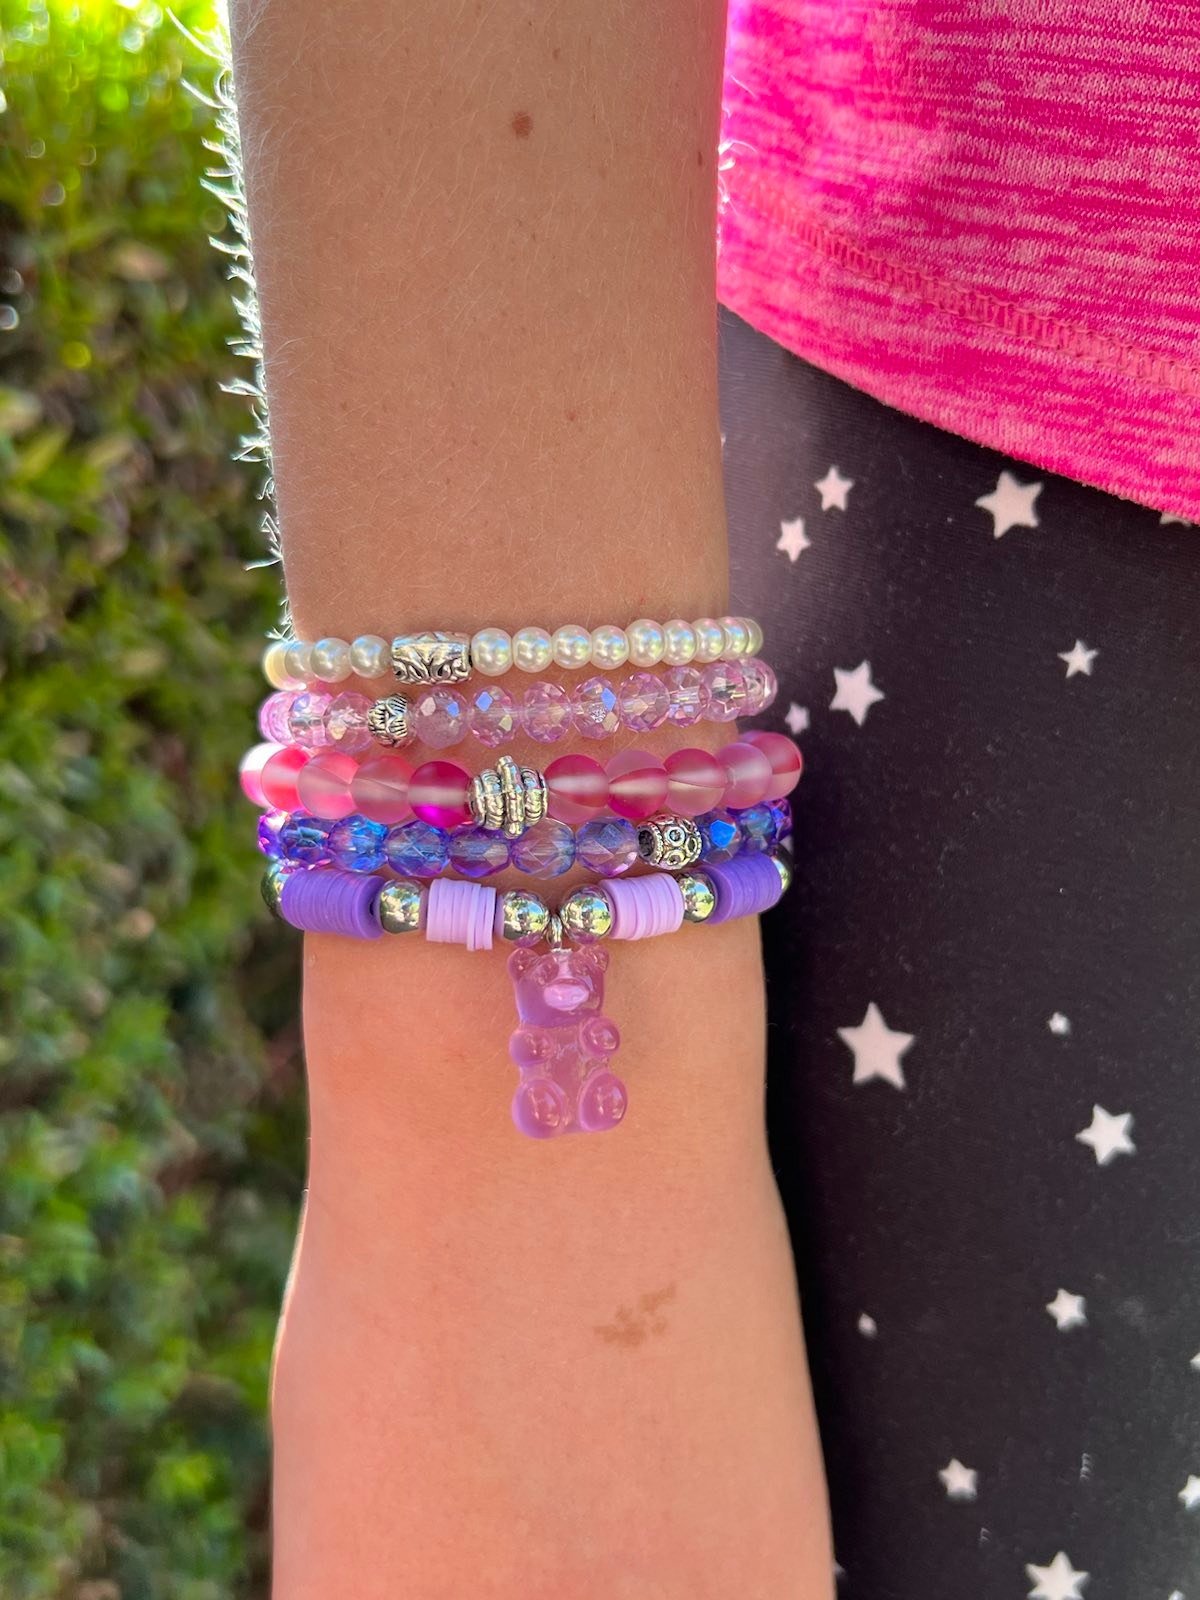 Personalize your very own handcrafted bracelet at MudLOVE!